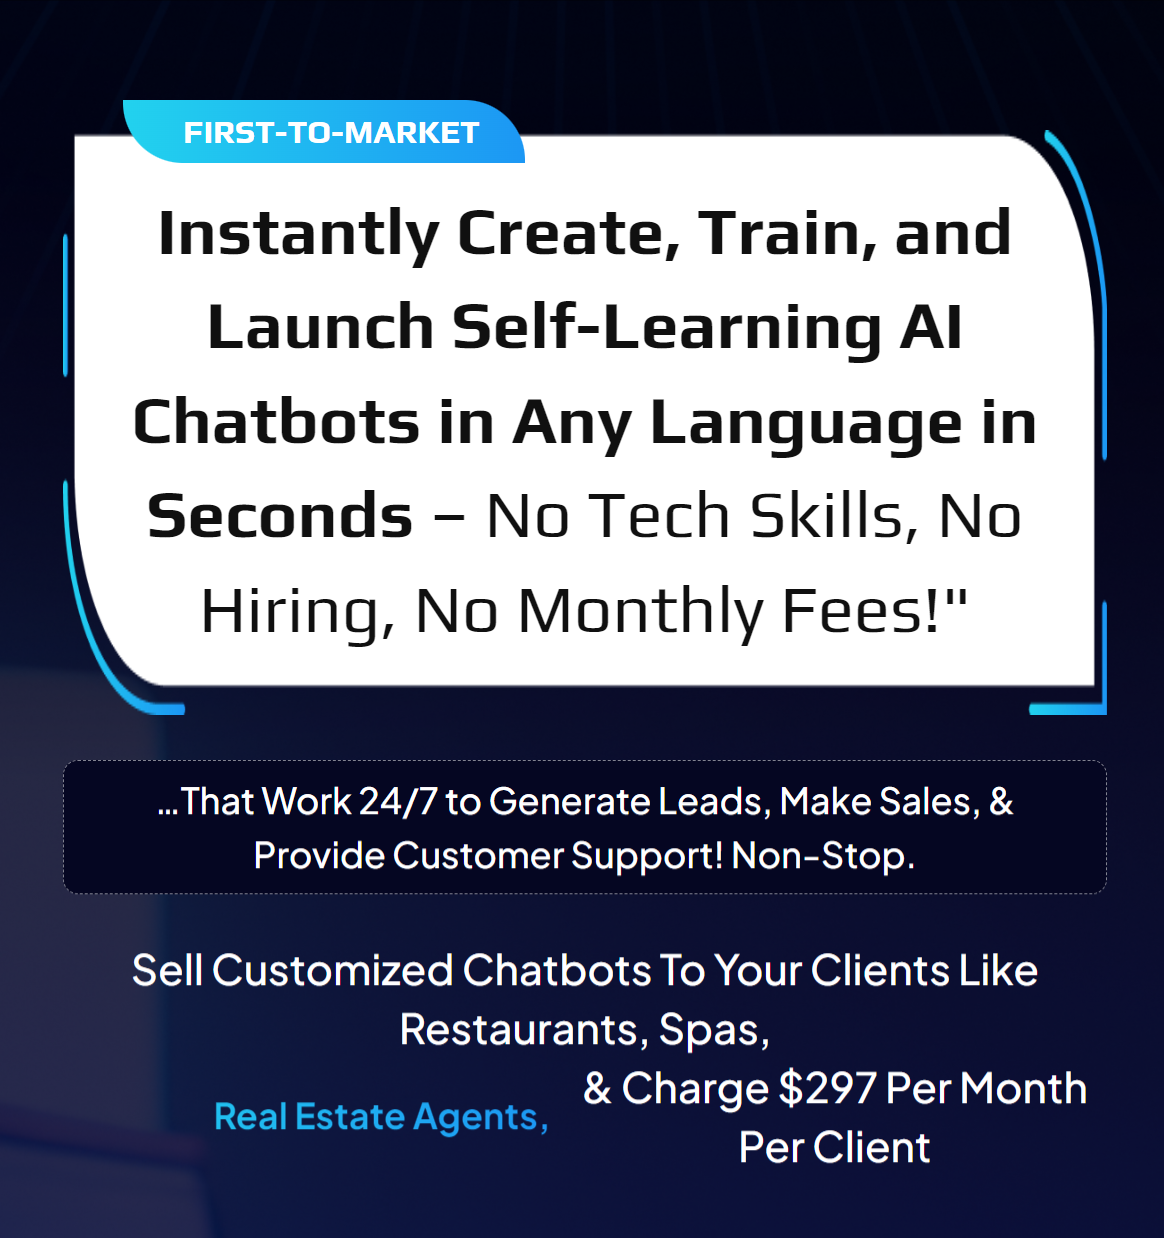 IntelliMate AI IntelliMate AI - Train and Launch Self-Learning AI Chatbots Instantly Without Hiring a Single Person! IntelliMate AI Bundle + IntelliMate AI OTOs